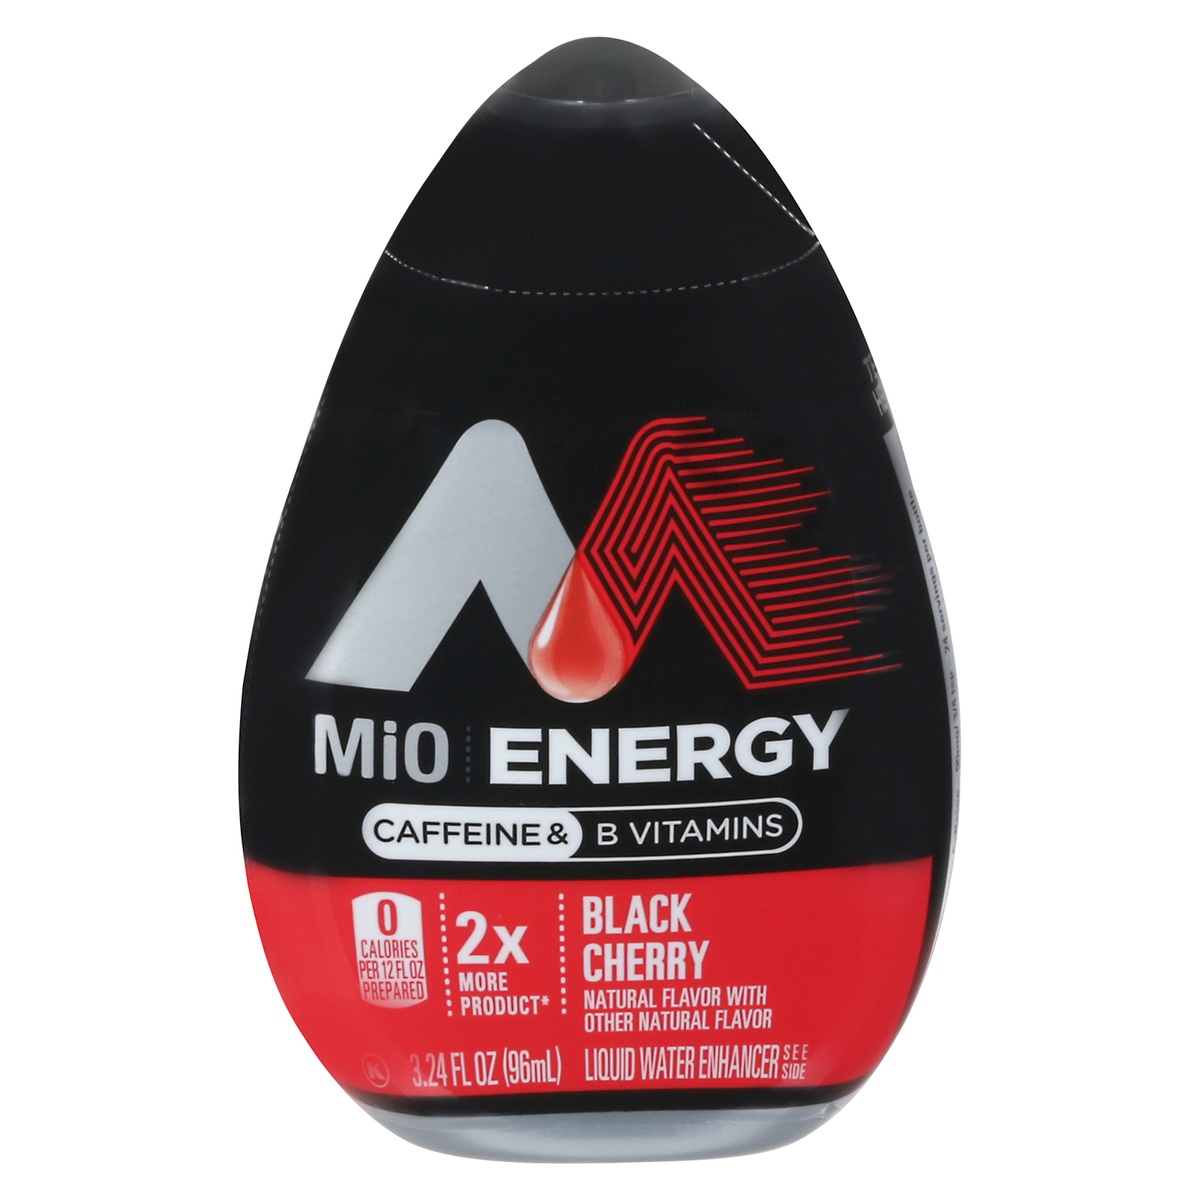 slide 11 of 11, Mio Energy Black Cherry Naturally Flavored Liquid Water Enhancer With 2X More Bottle, 3.24 fl oz